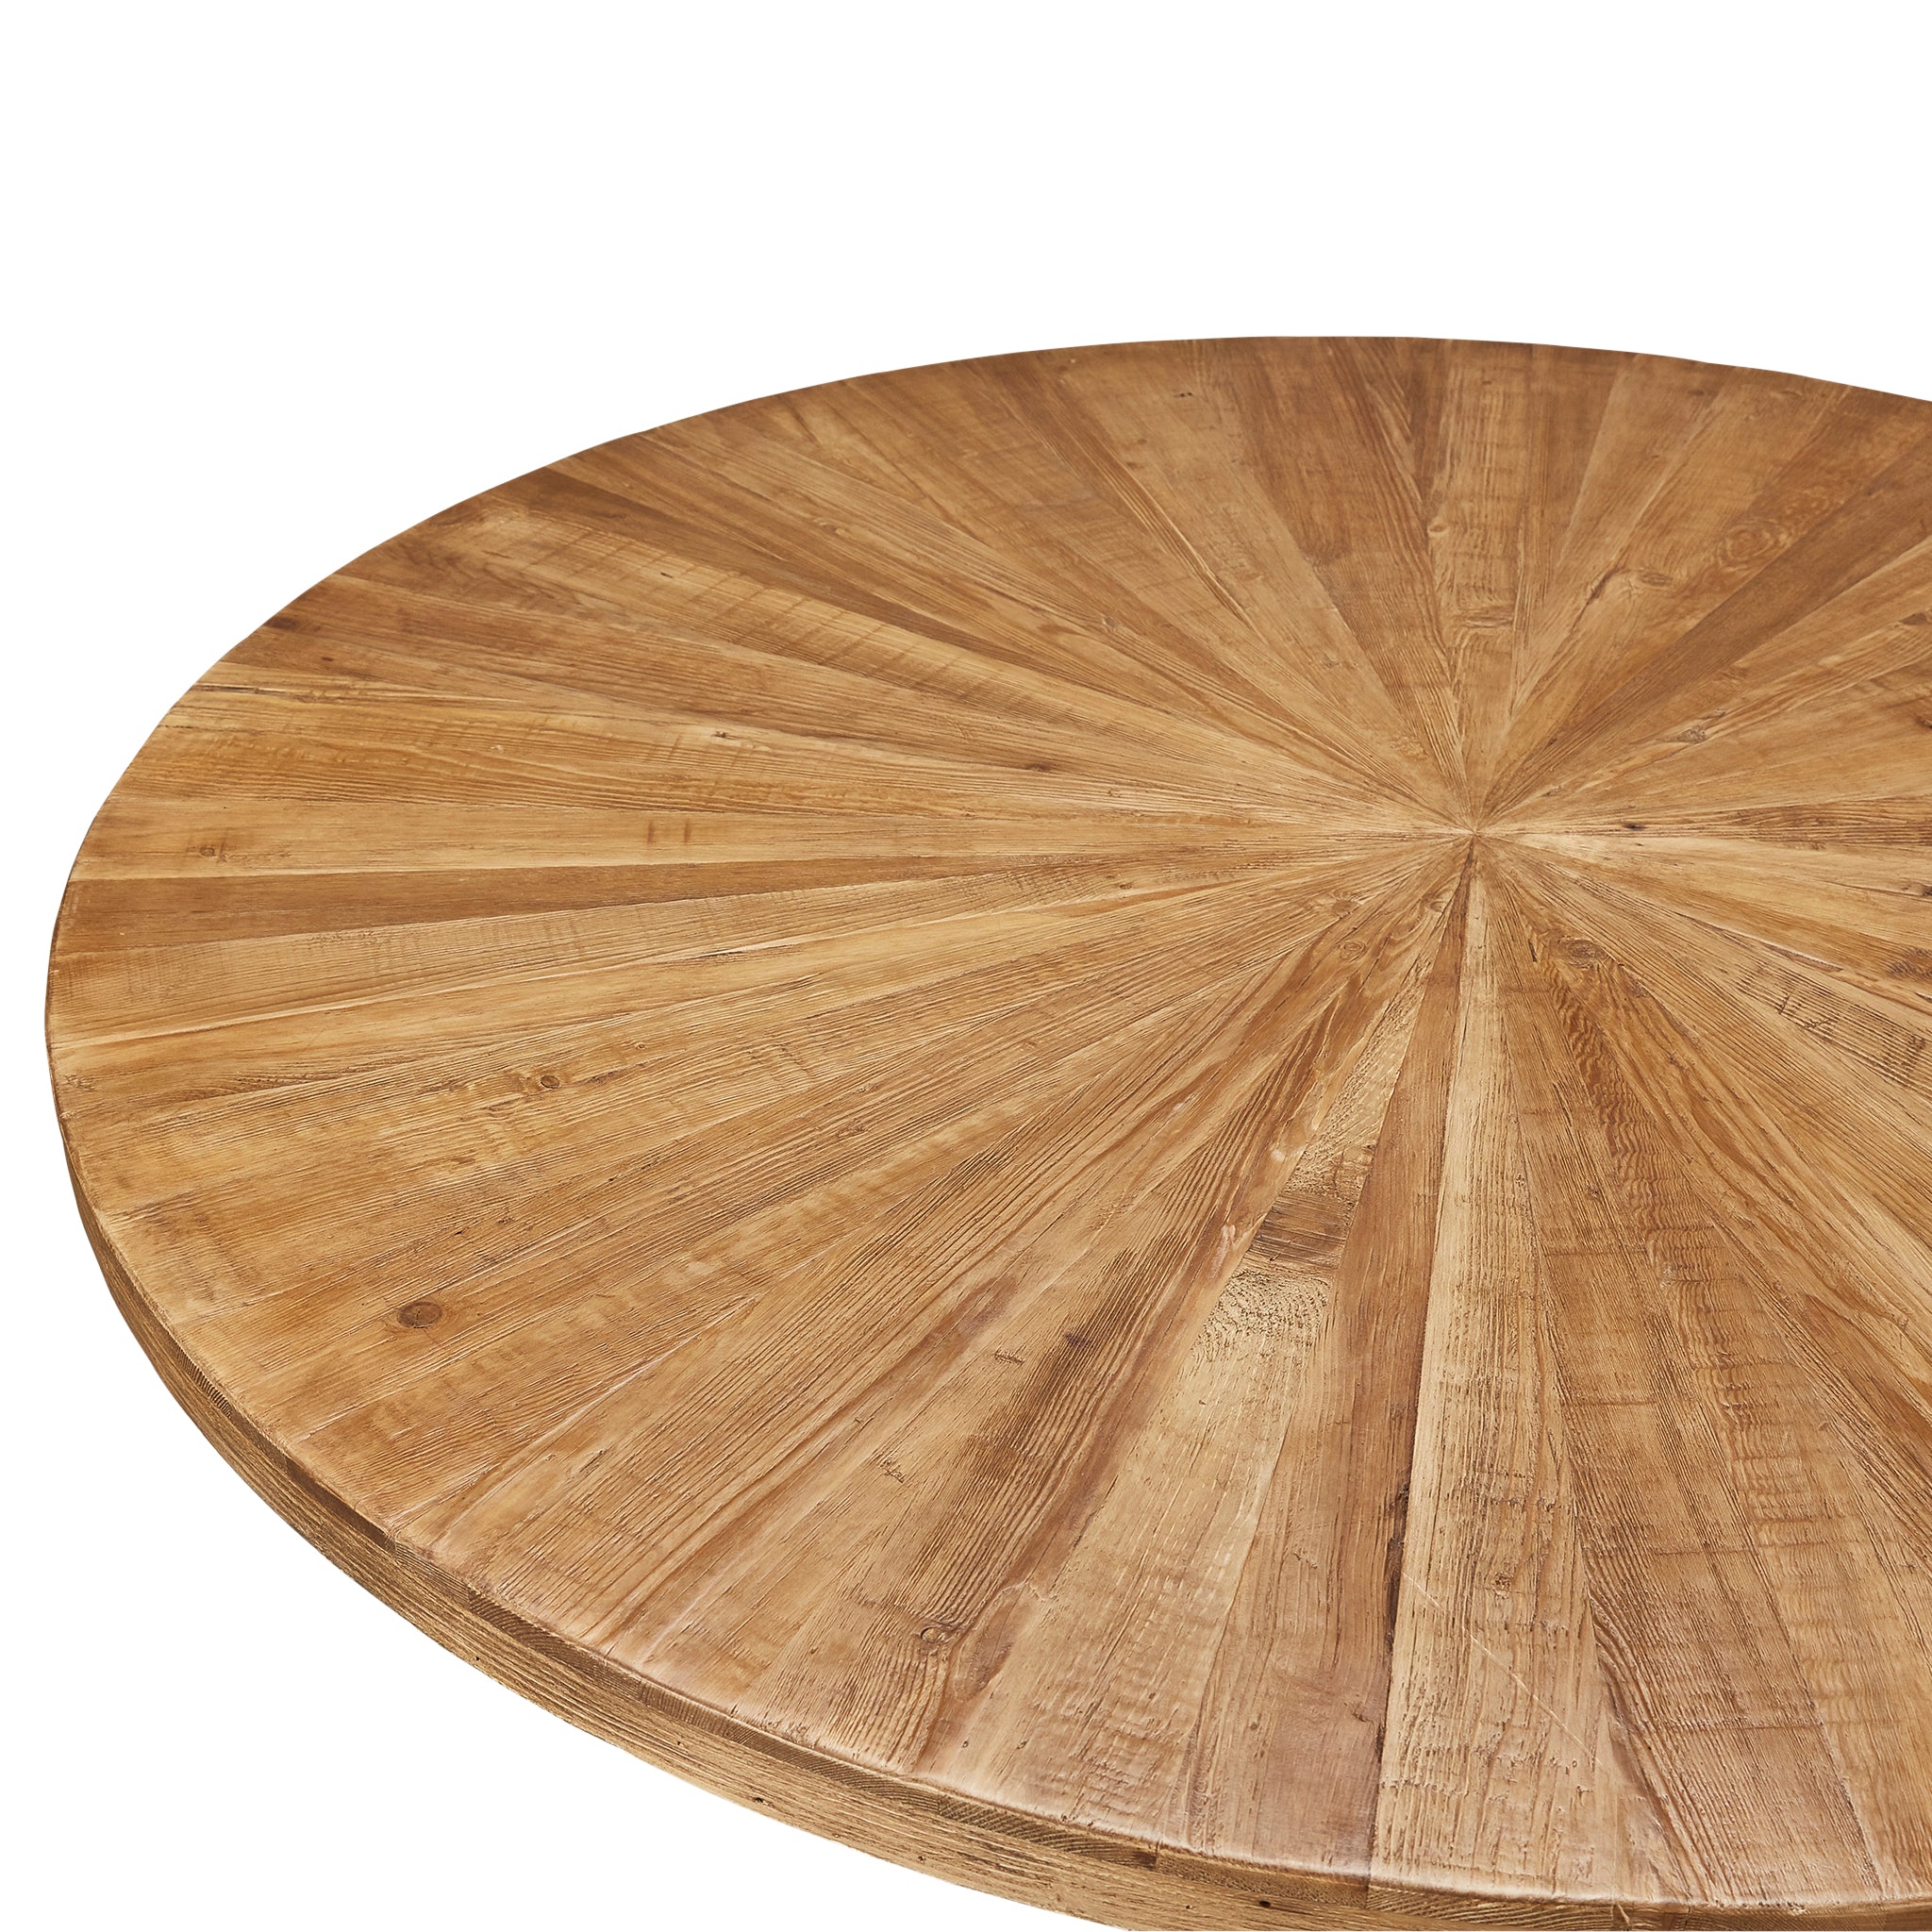 Concentric Table